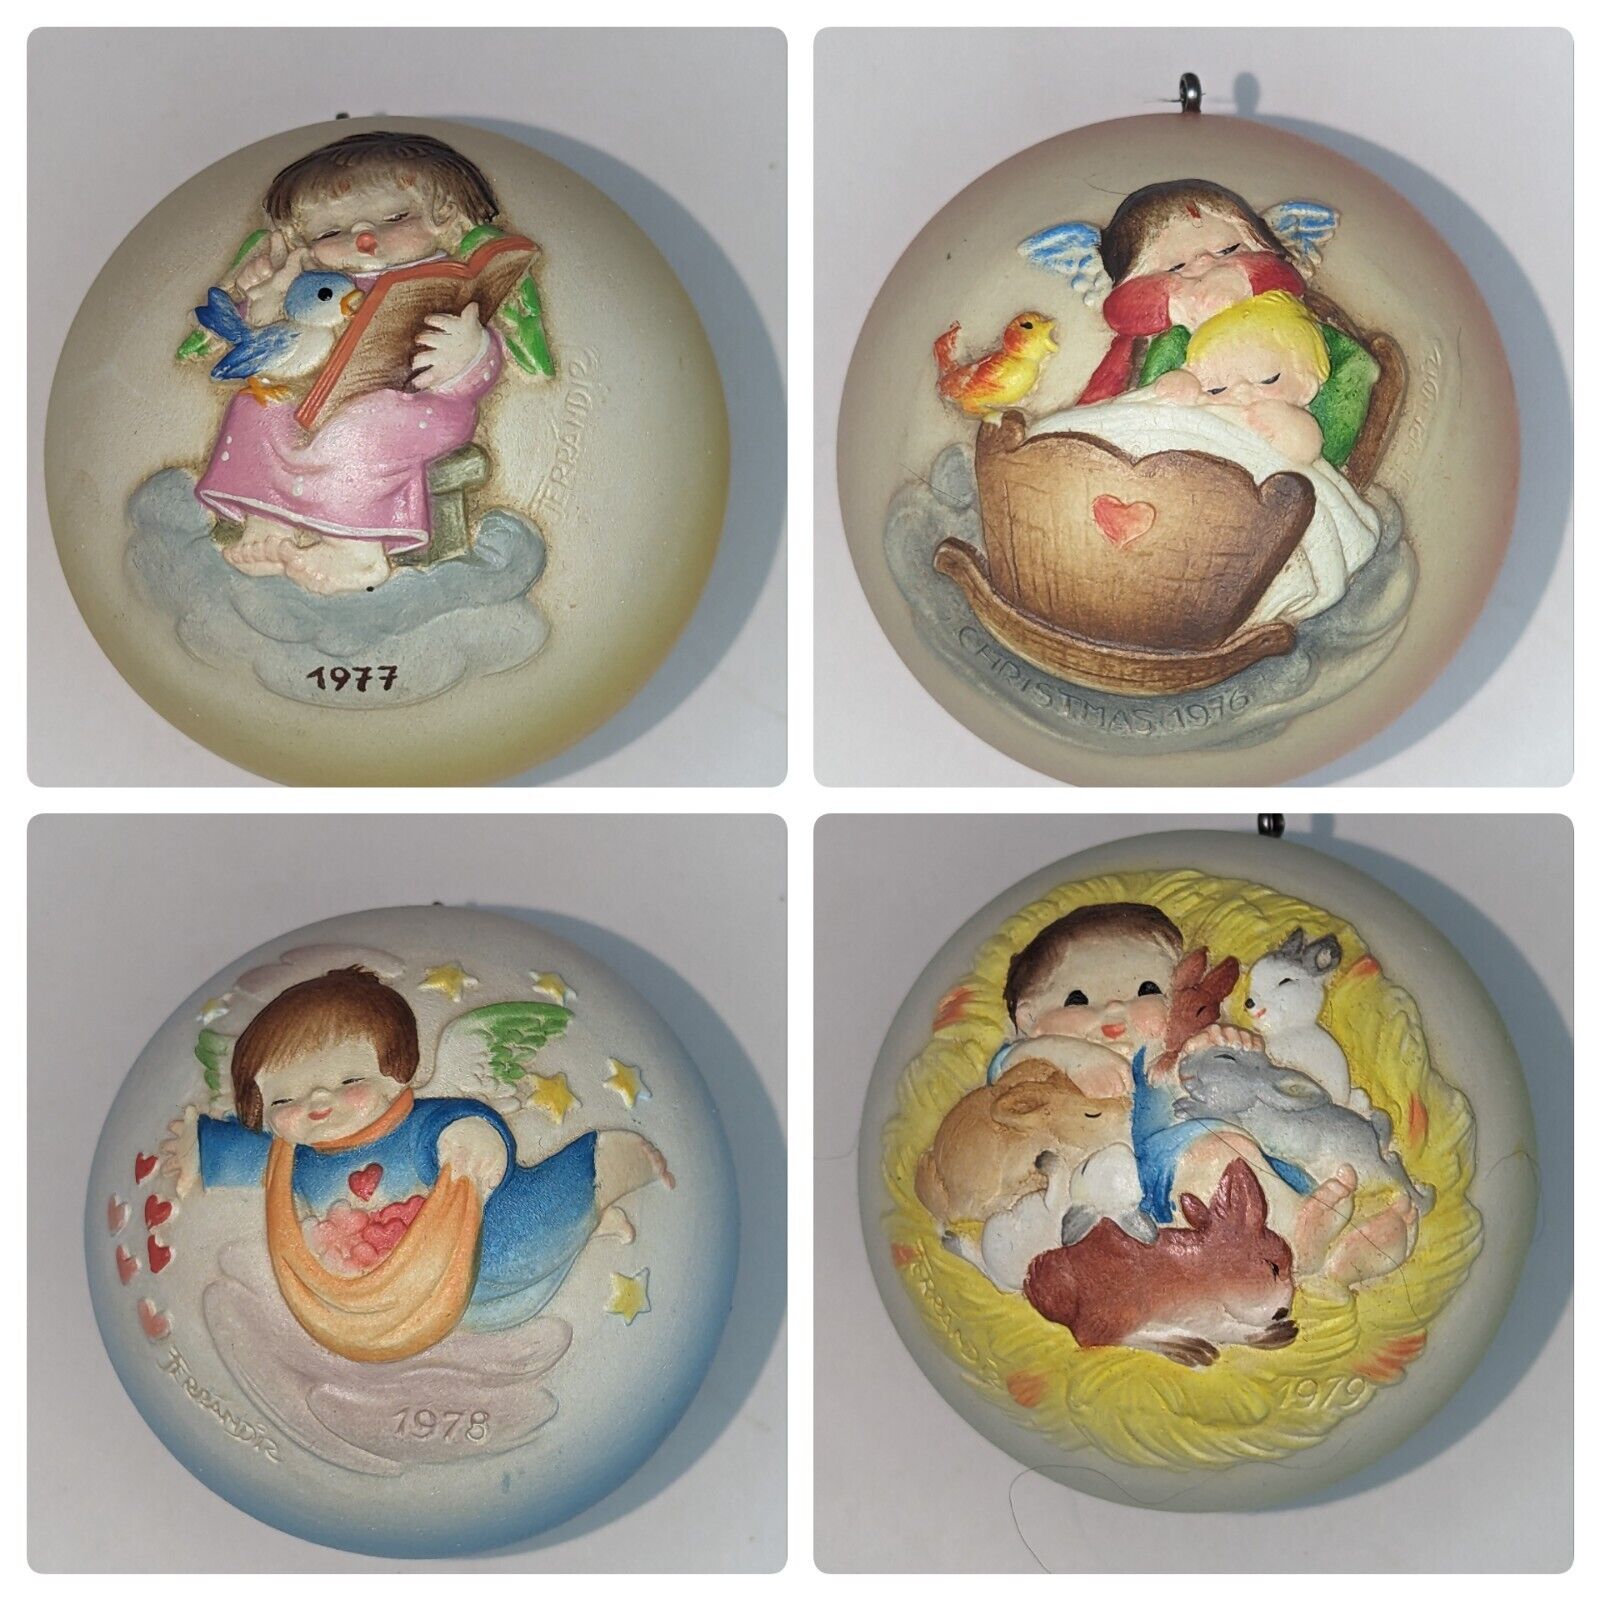 Lot of 4 ANRI Christmas Ornaments 1976 \'77 \'78 \'79 Jerrandie Hand Crafted  Italy